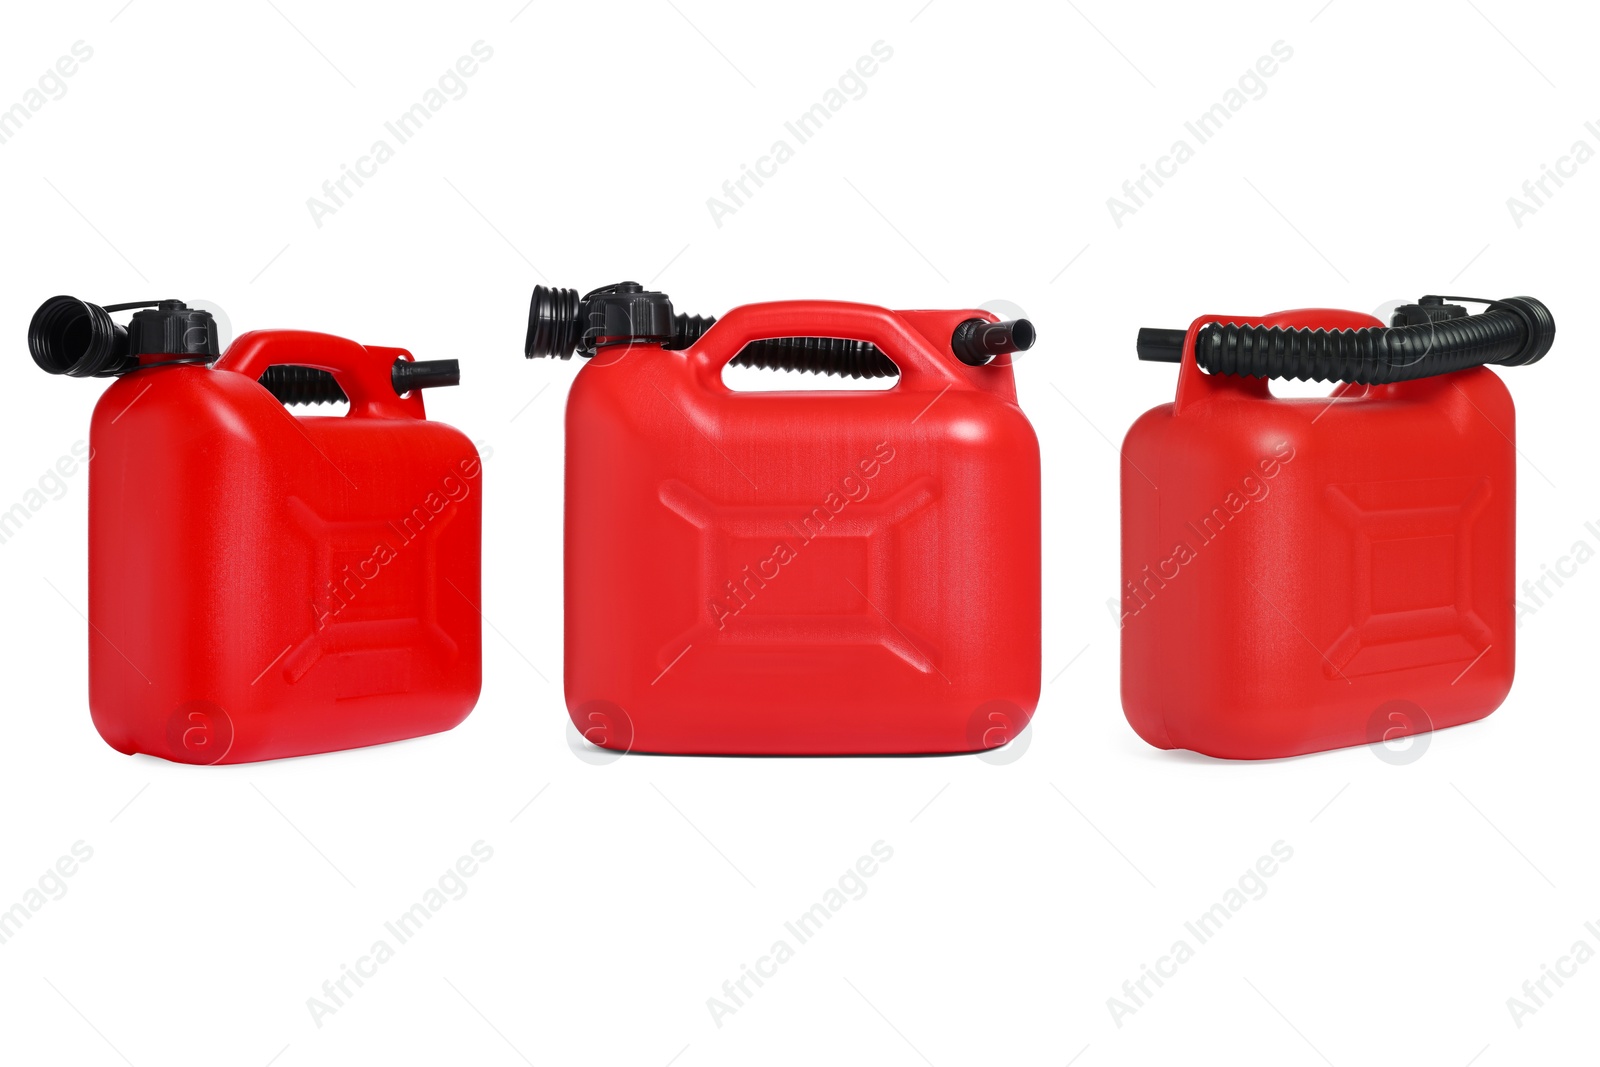 Image of Plastic canister on white background, different sides